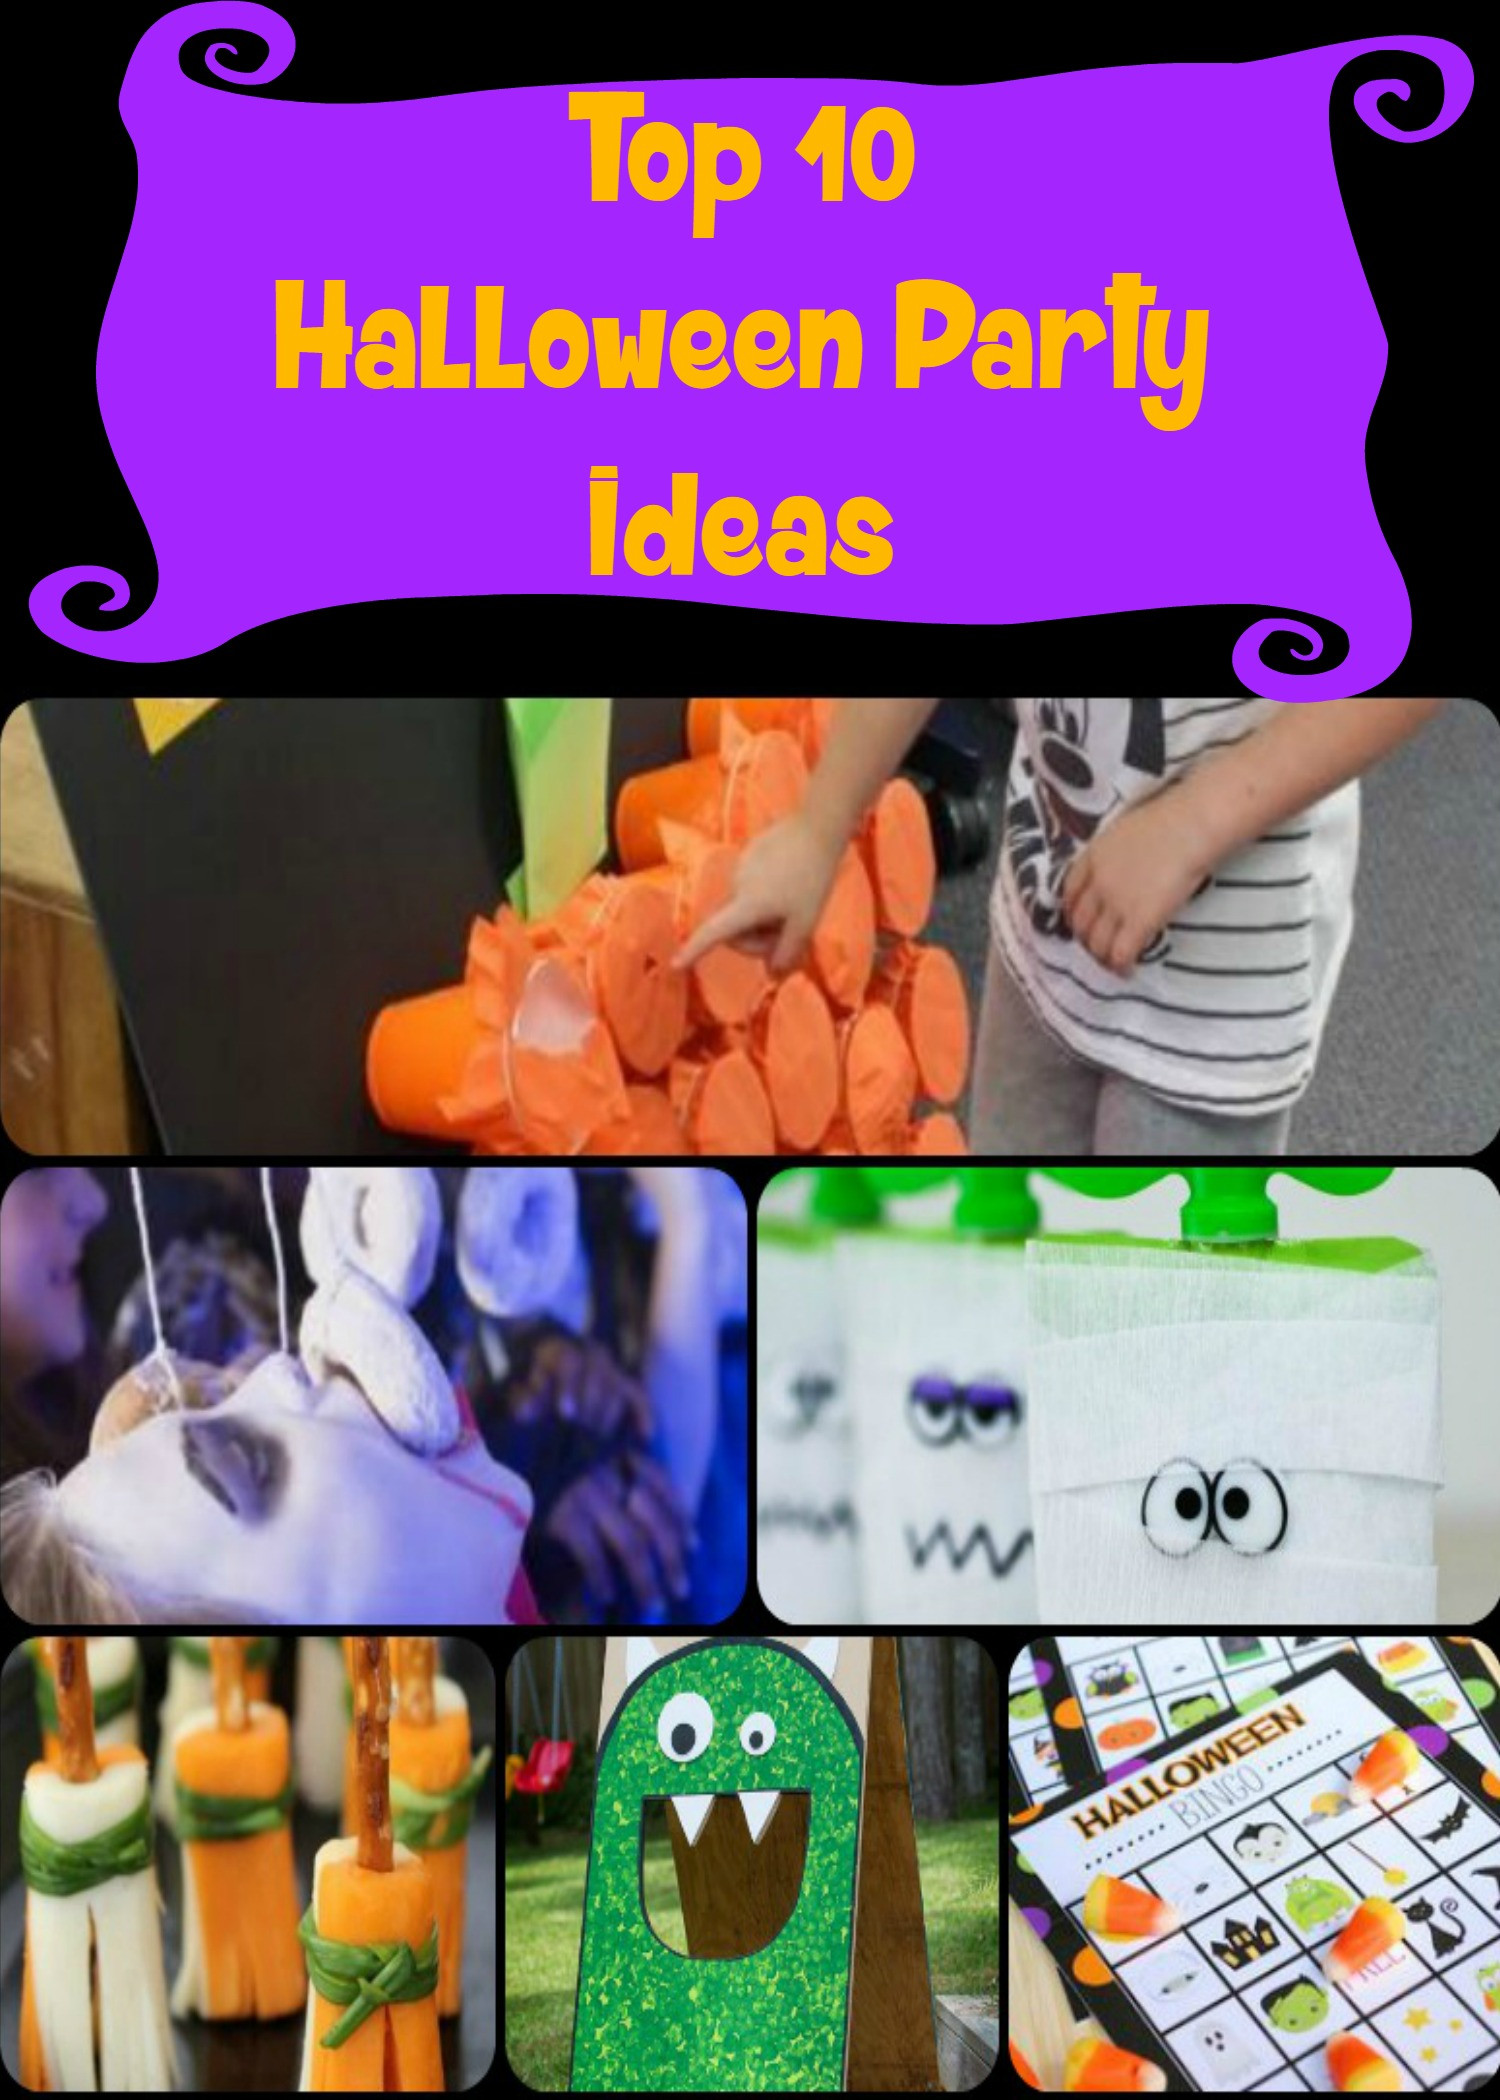 Halloween Party Ideas For Teenagers
 Top 10 Kids Halloween Party ideas